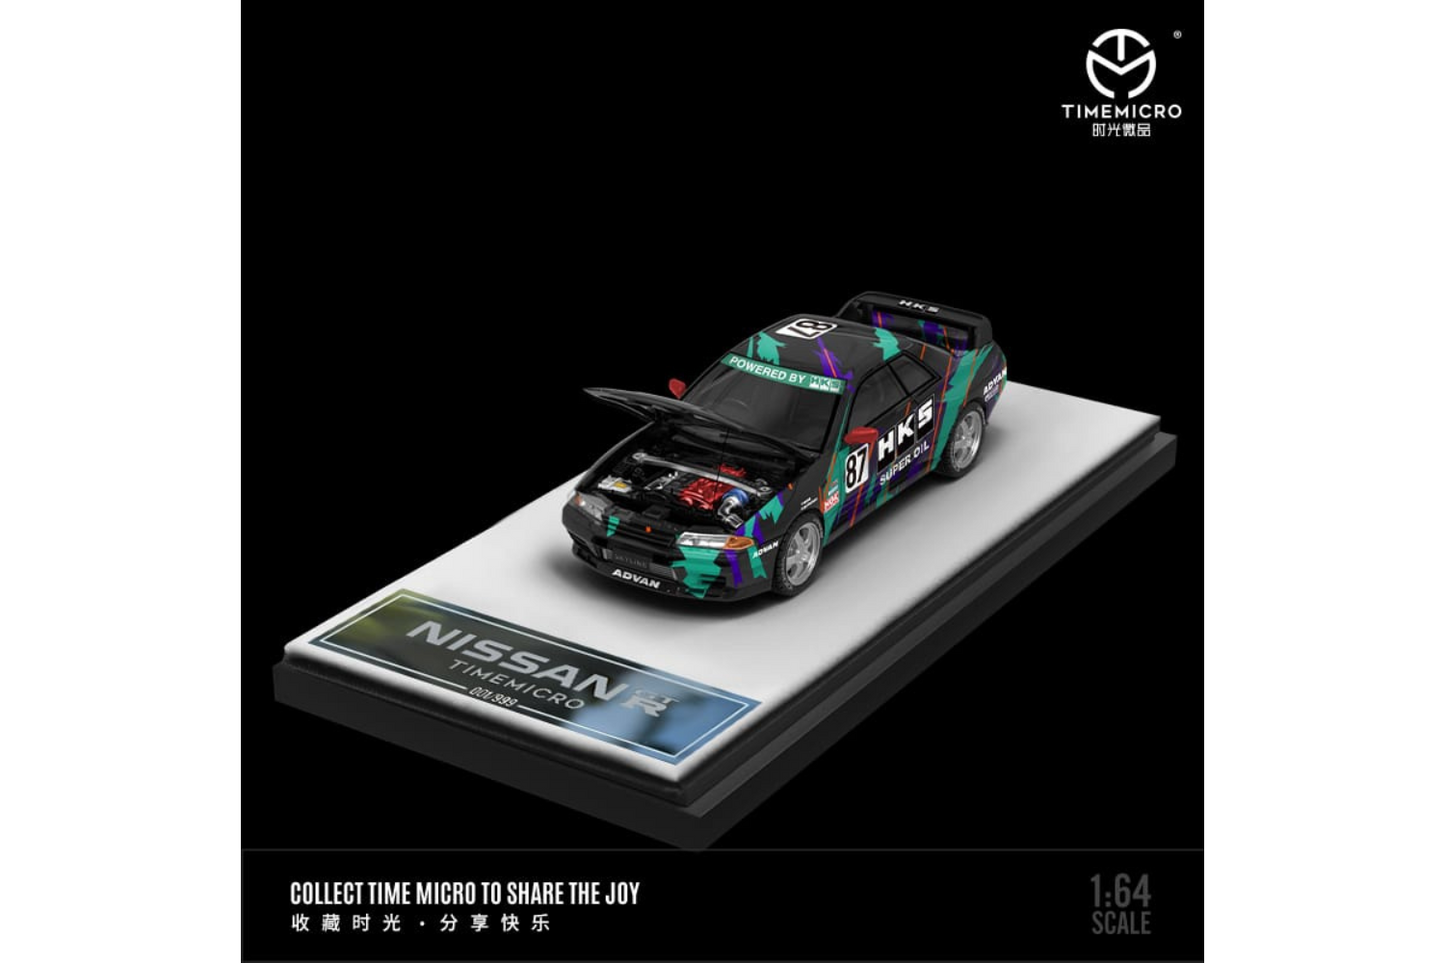 Time Micro 1/64 Nissan Skyline GT-R (R32) In #87 HKS Livery